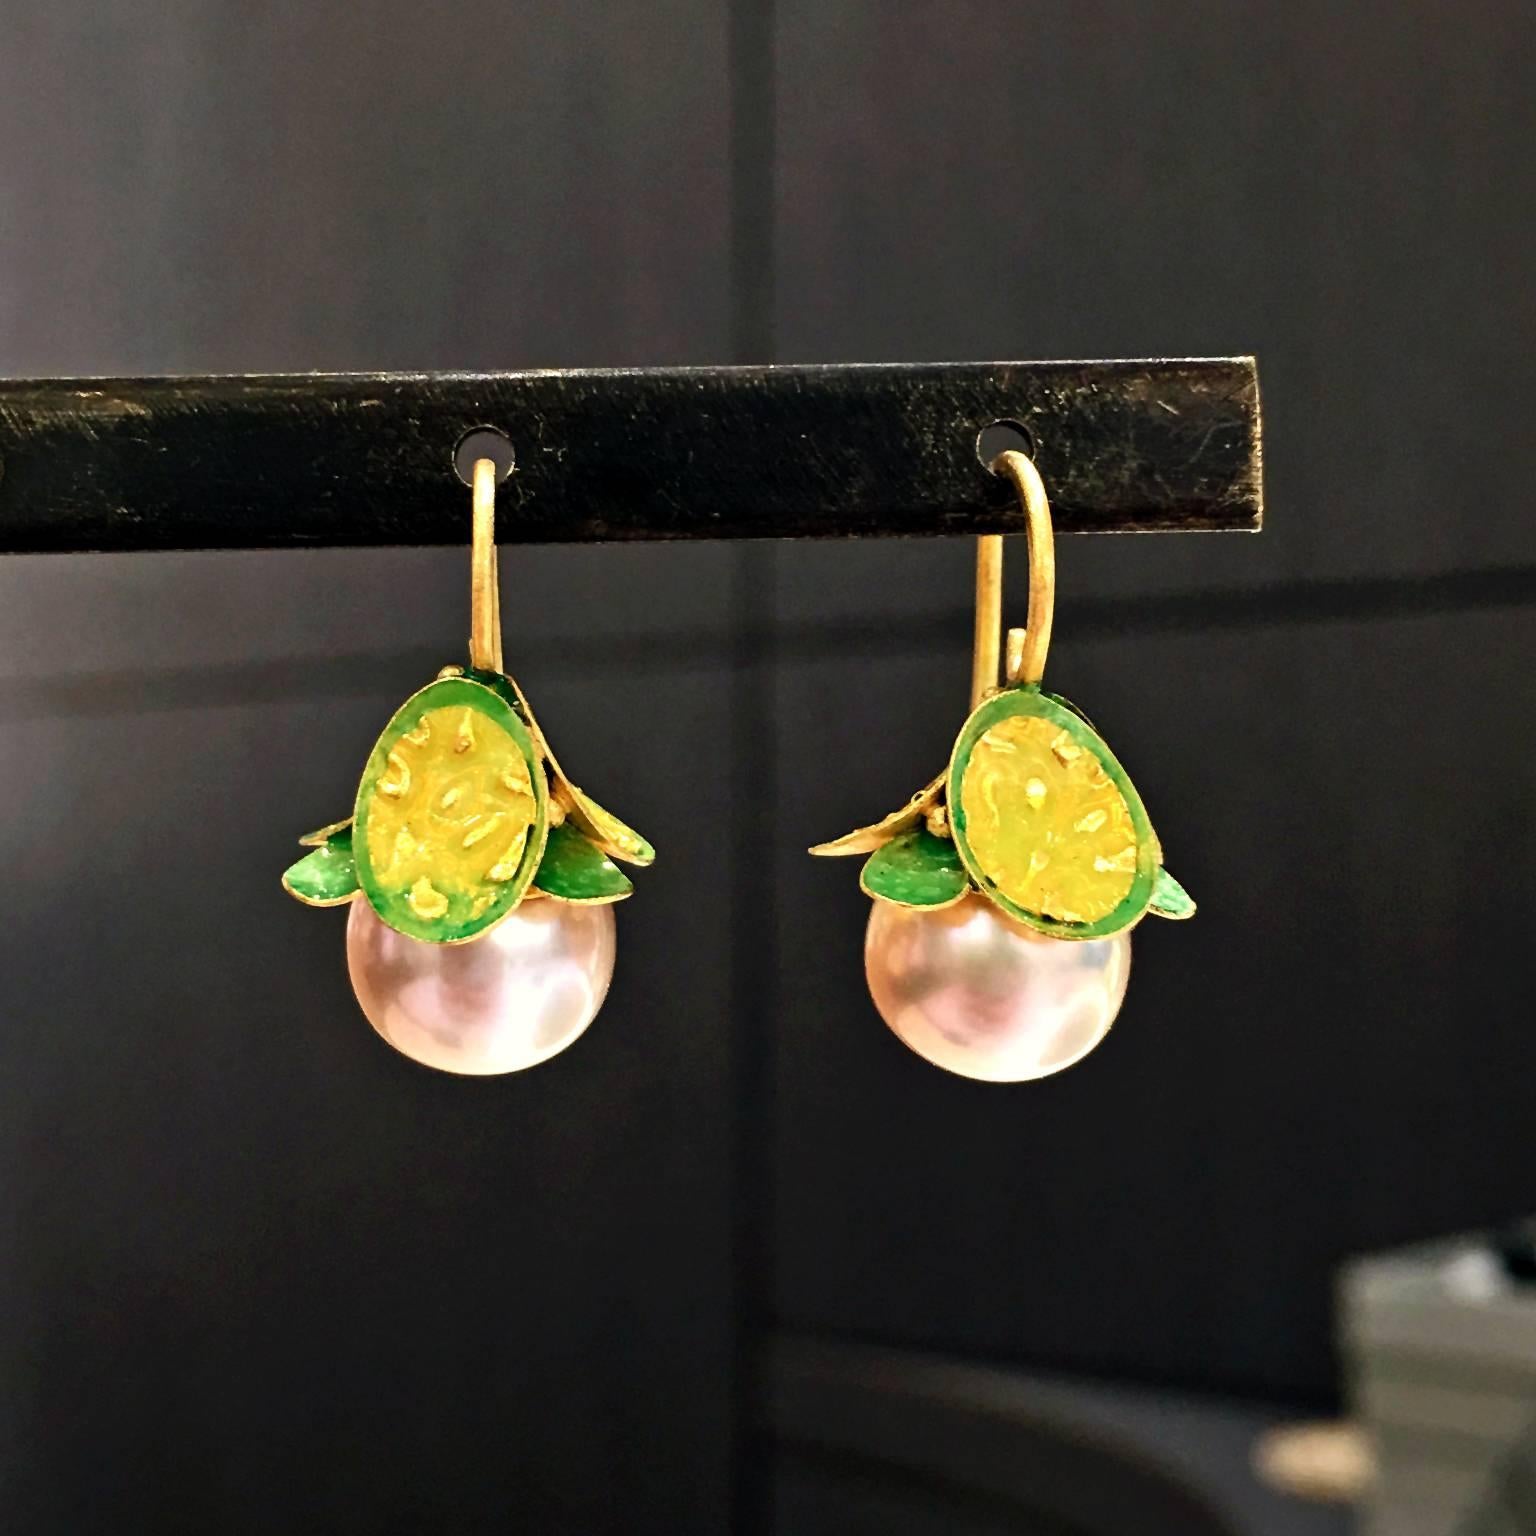 Drop Earrings handcrafted in 21k yellow gold and 24k gold with soft pink freshwater pearls under green and yellow opalescent enamel leaves. 